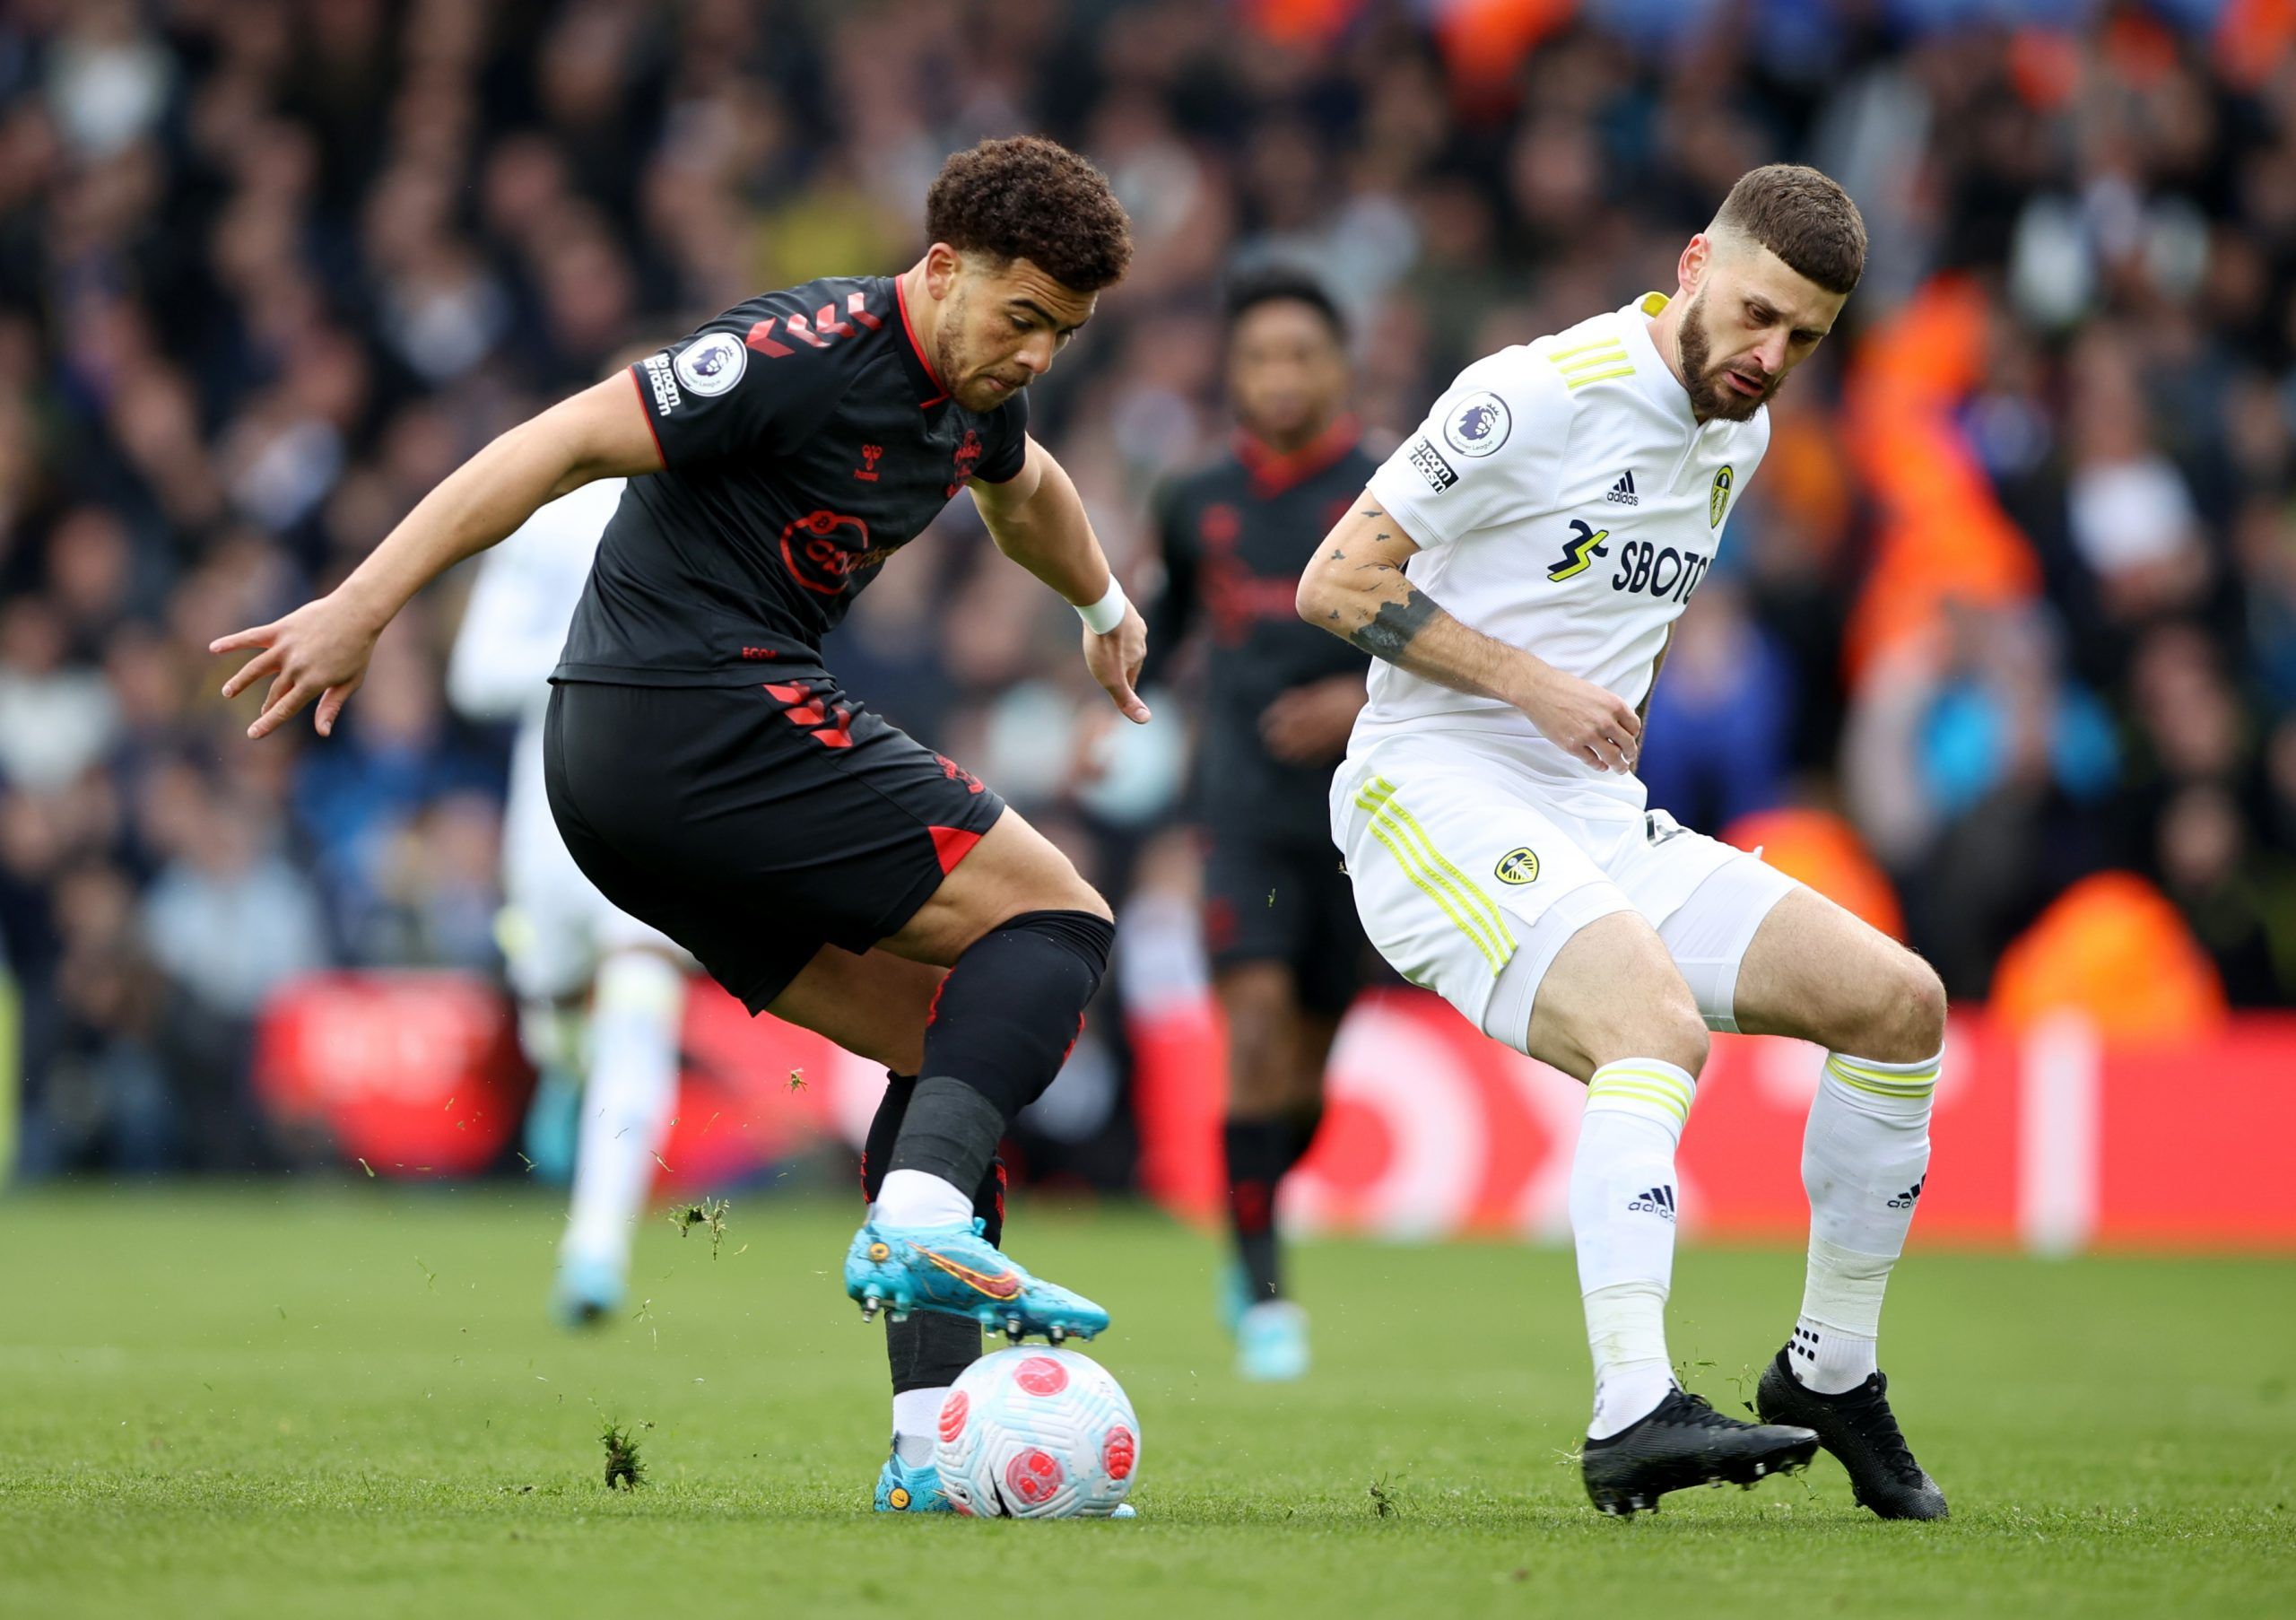 Southampton's Che Adams in action with Leeds United's Mateusz Klich